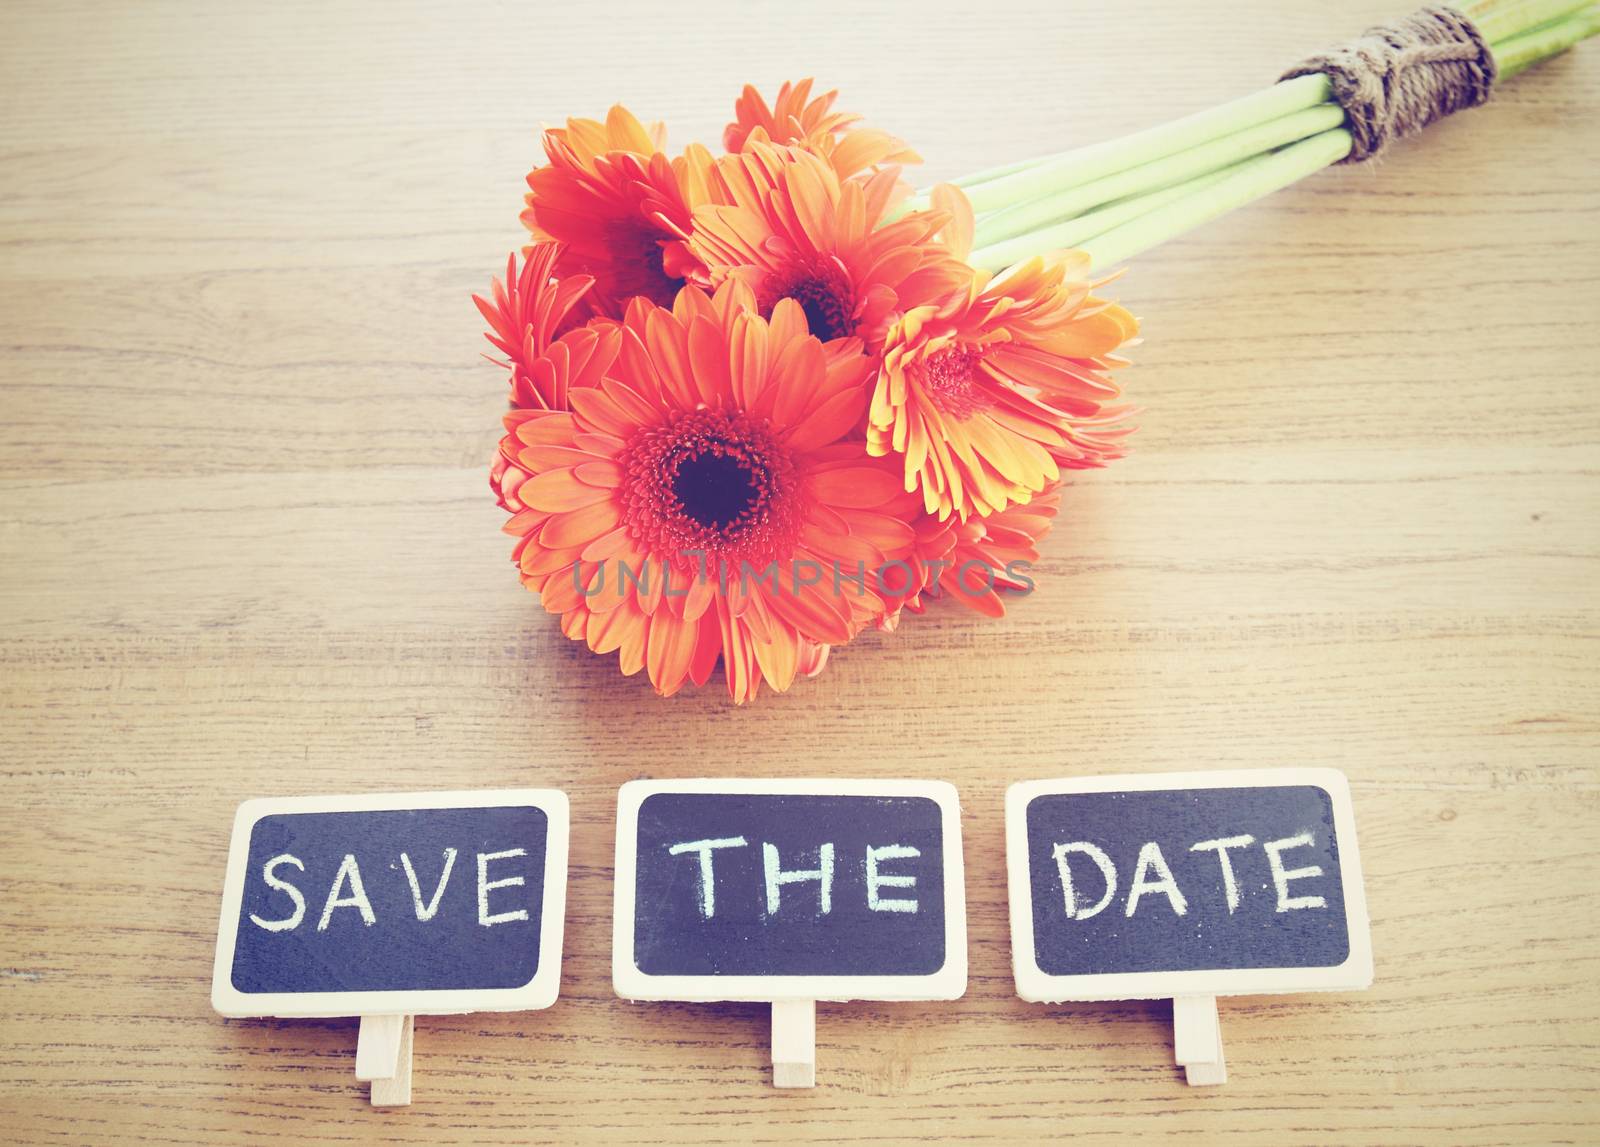 Save the date written on blackboard with flower, retro filter effect